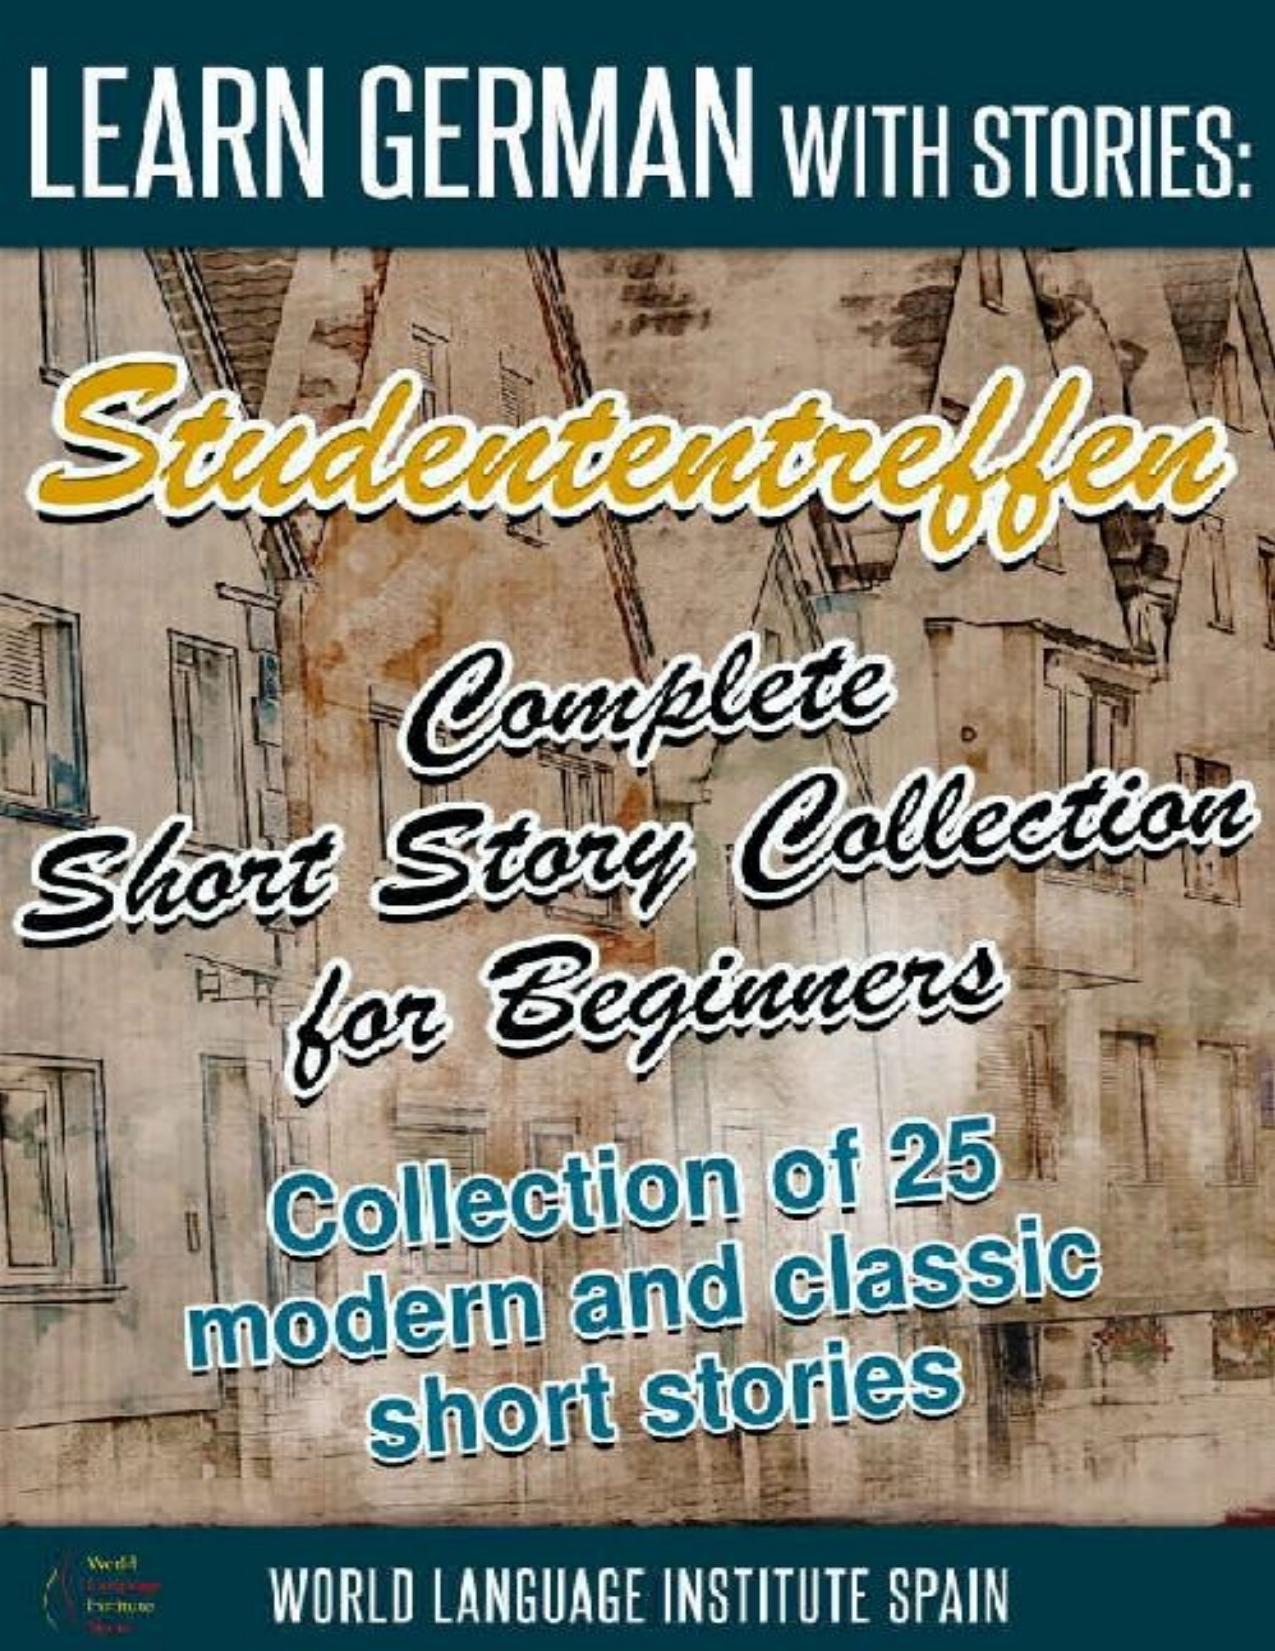 Learn German with Stories: Studententreffen Complete Short Story Collection for Beginners; Collection of 25 Modern and Classic Short Stories